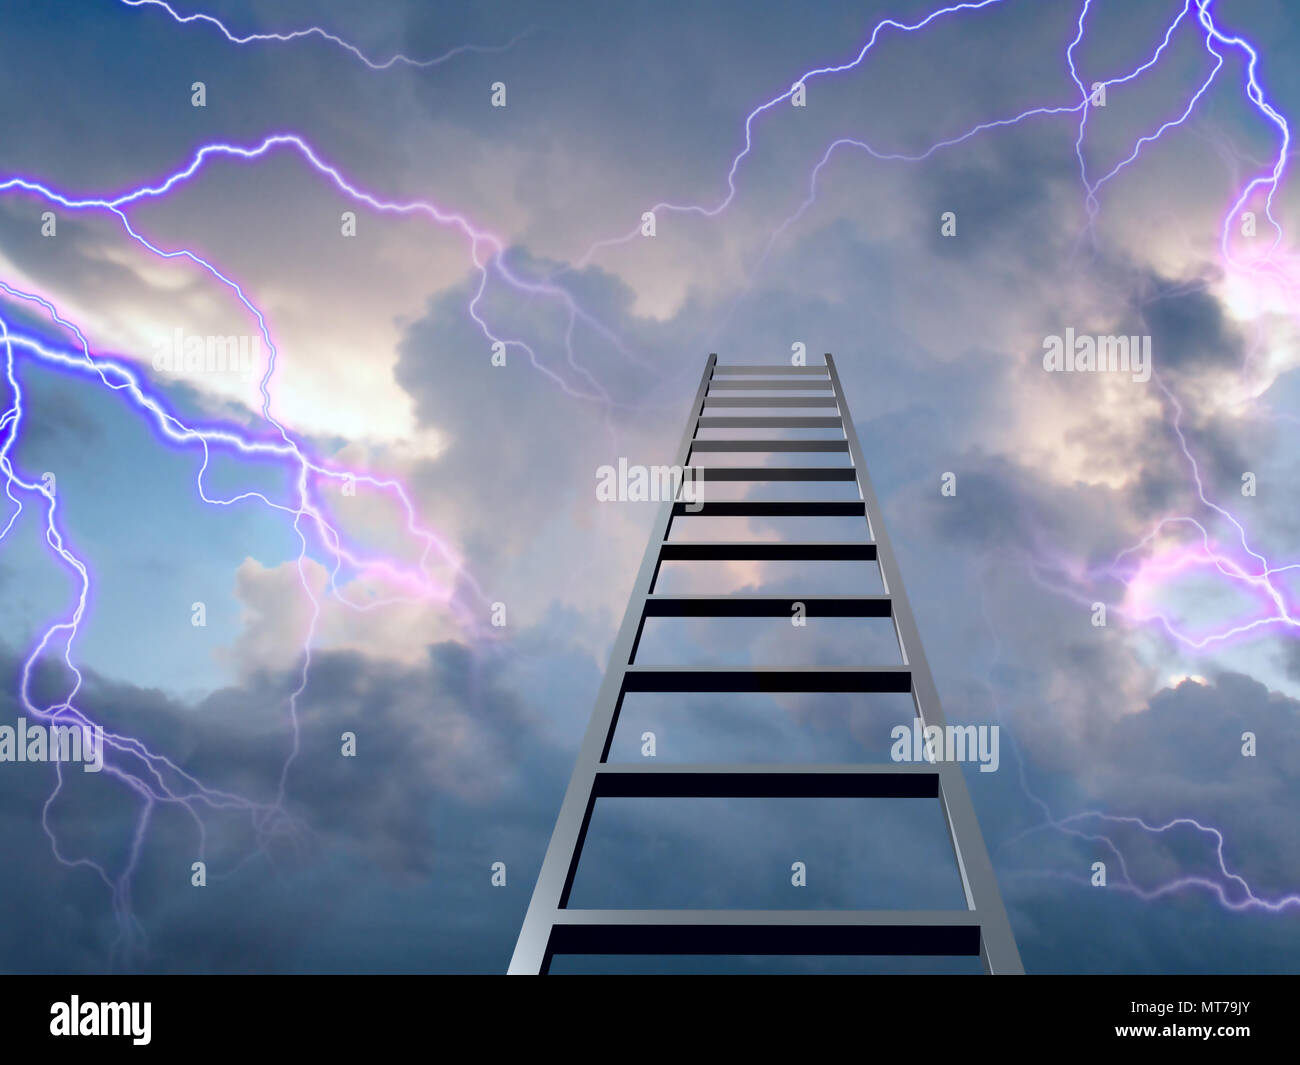 Lightning flasshes with ladder to the top Stock Photo